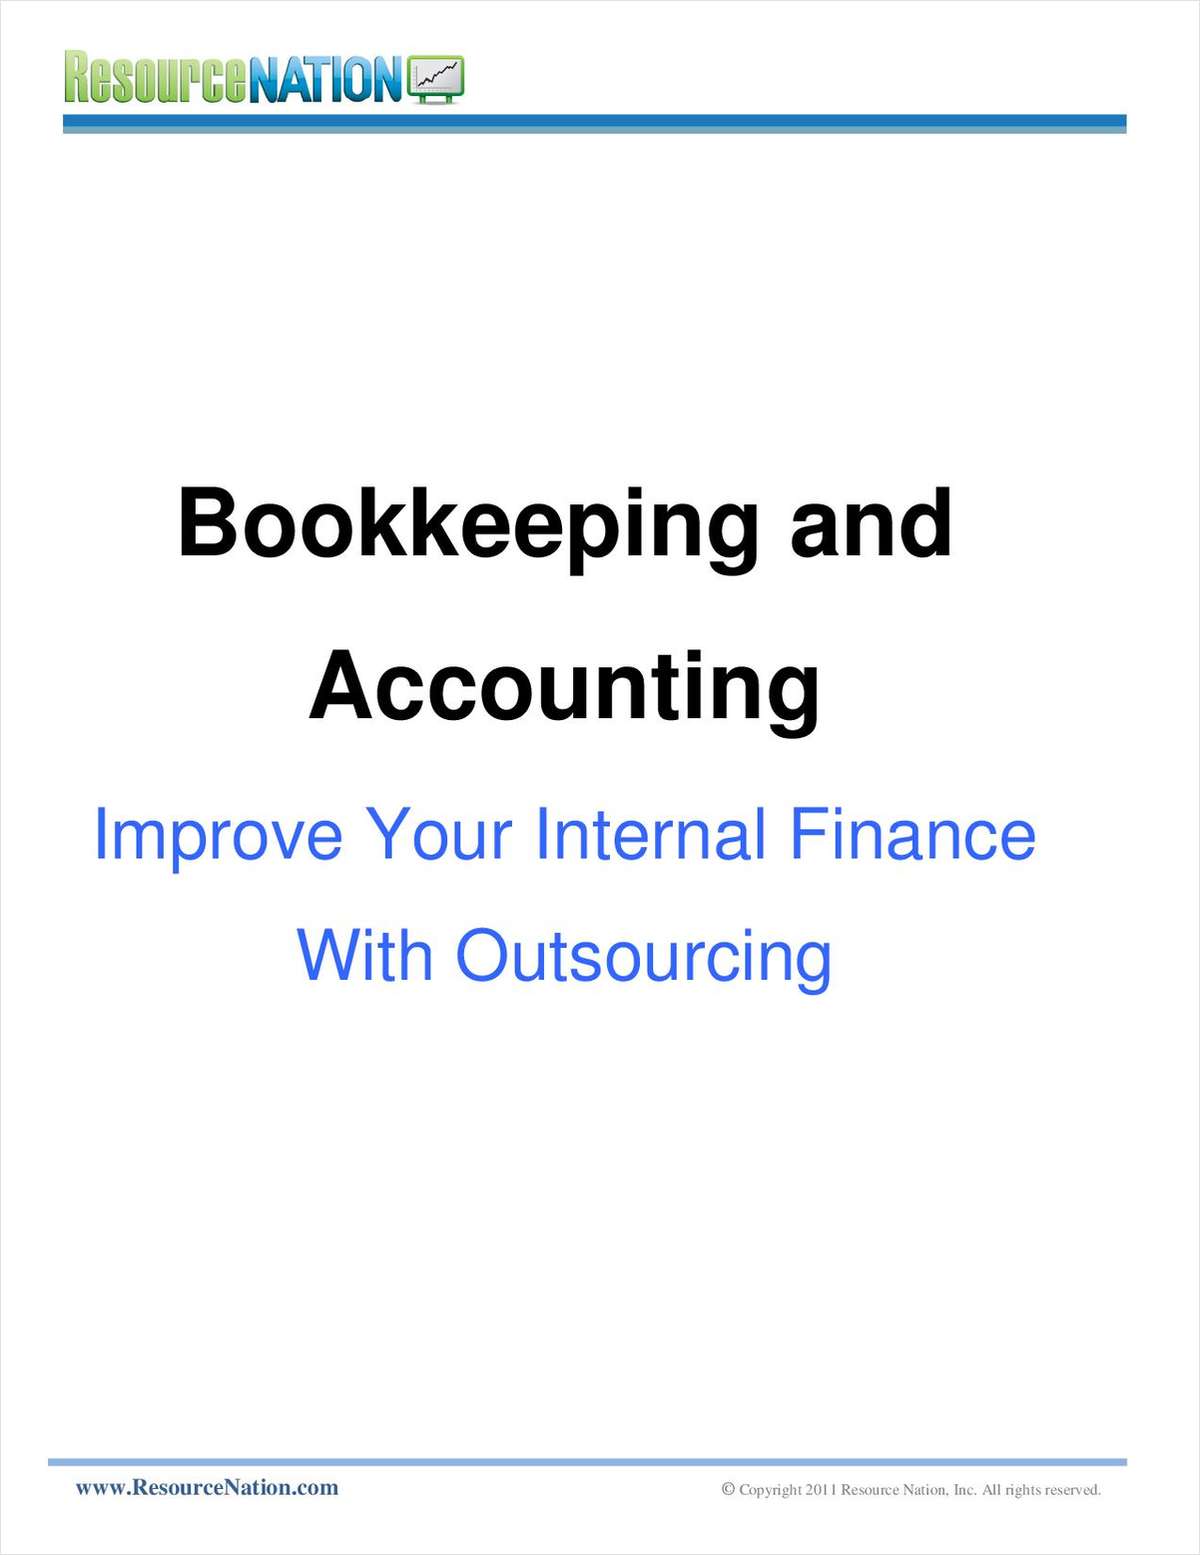 How Professional Accounting Services Companies Can Reduce Your Business Expenses